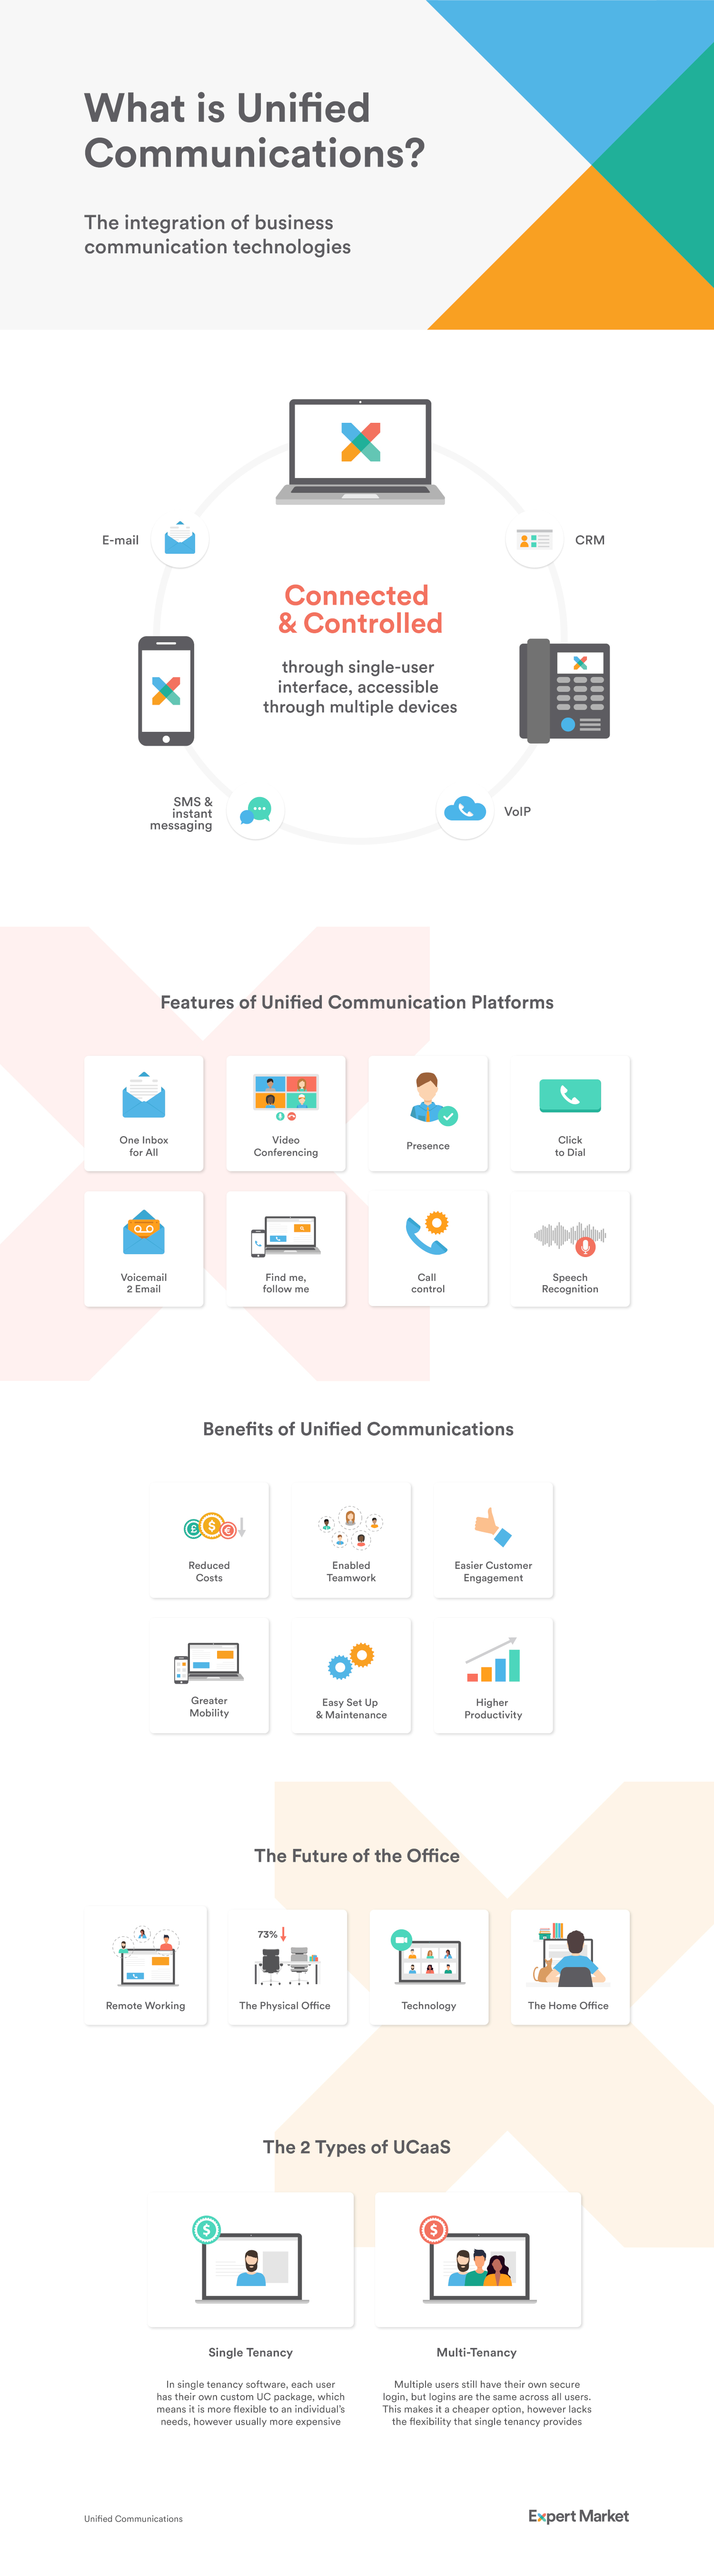 Expert Market provides a comprehensive view on unified communications and how to integrate business technologies